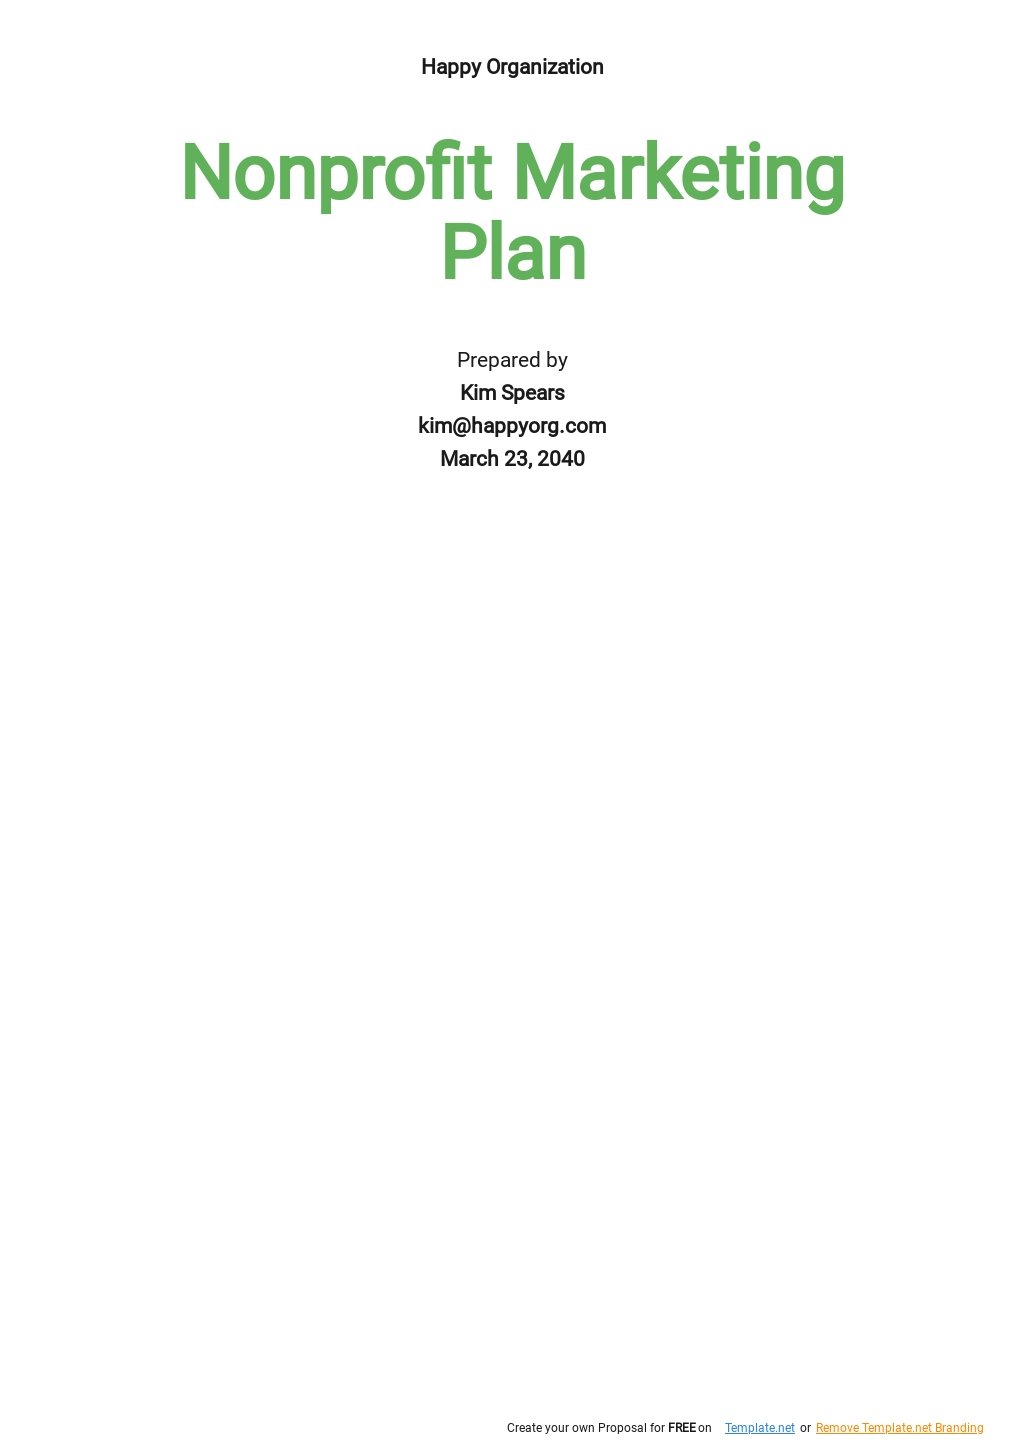 Free Nonprofit Business Plan Templates, 26+ Download in PDF, Word